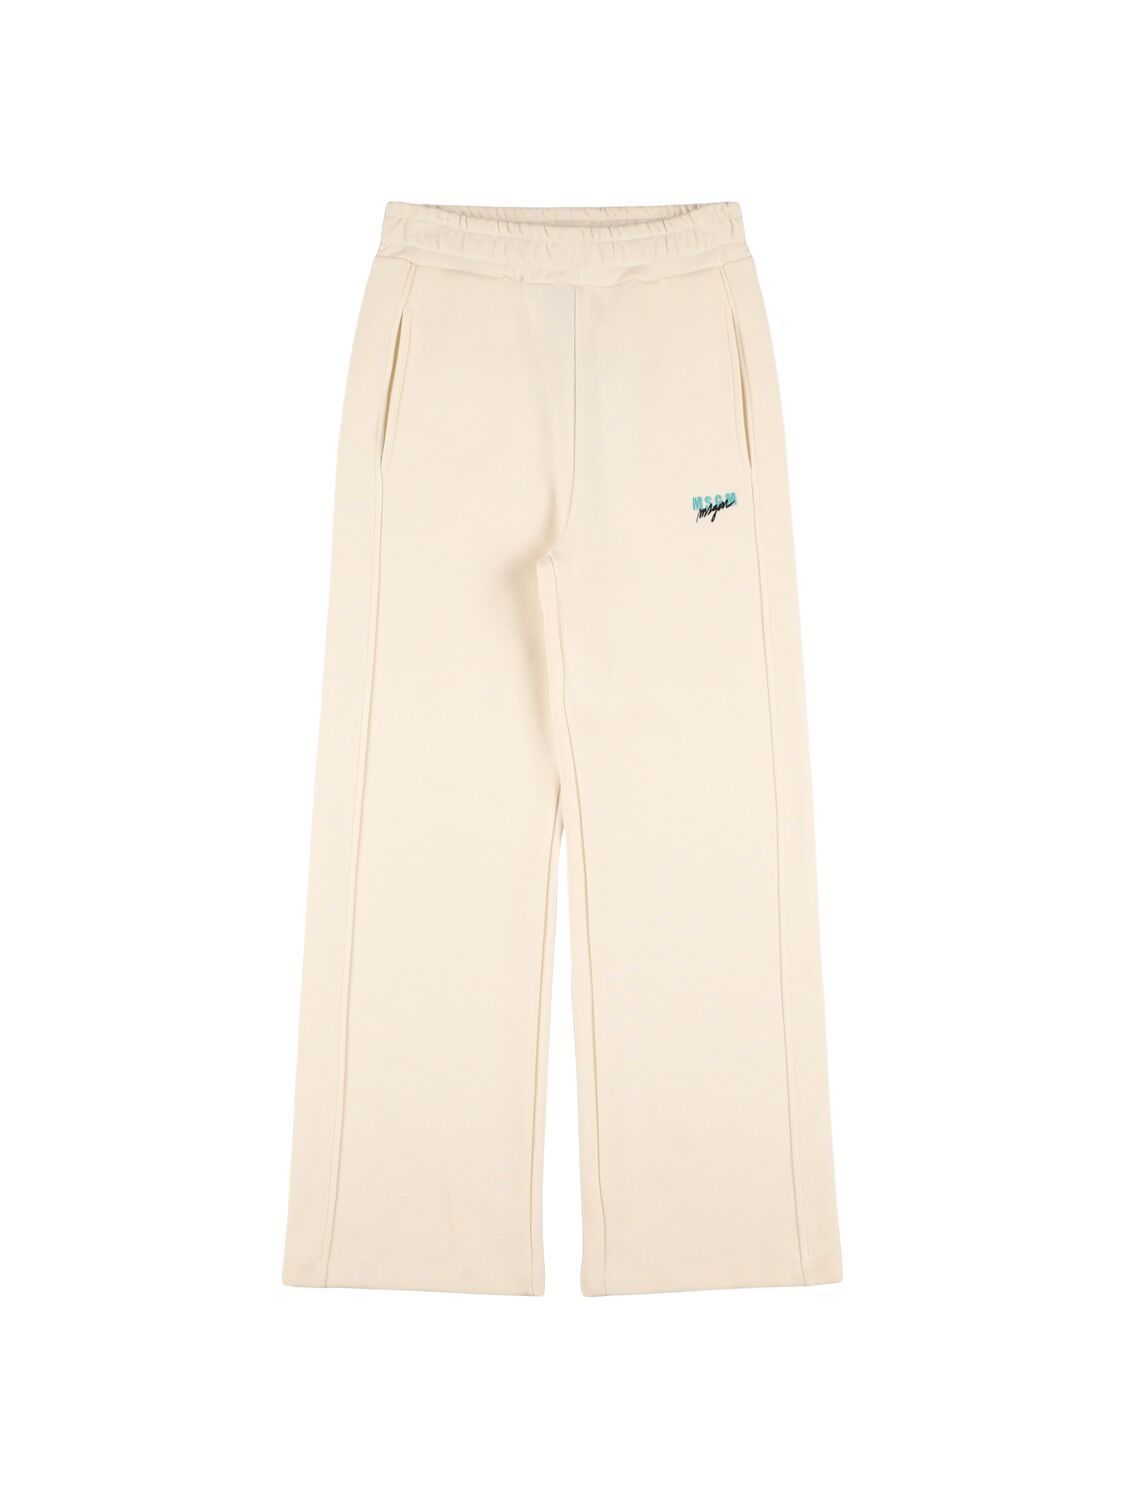 Msgm Ribbed Knit Flared Pants In White